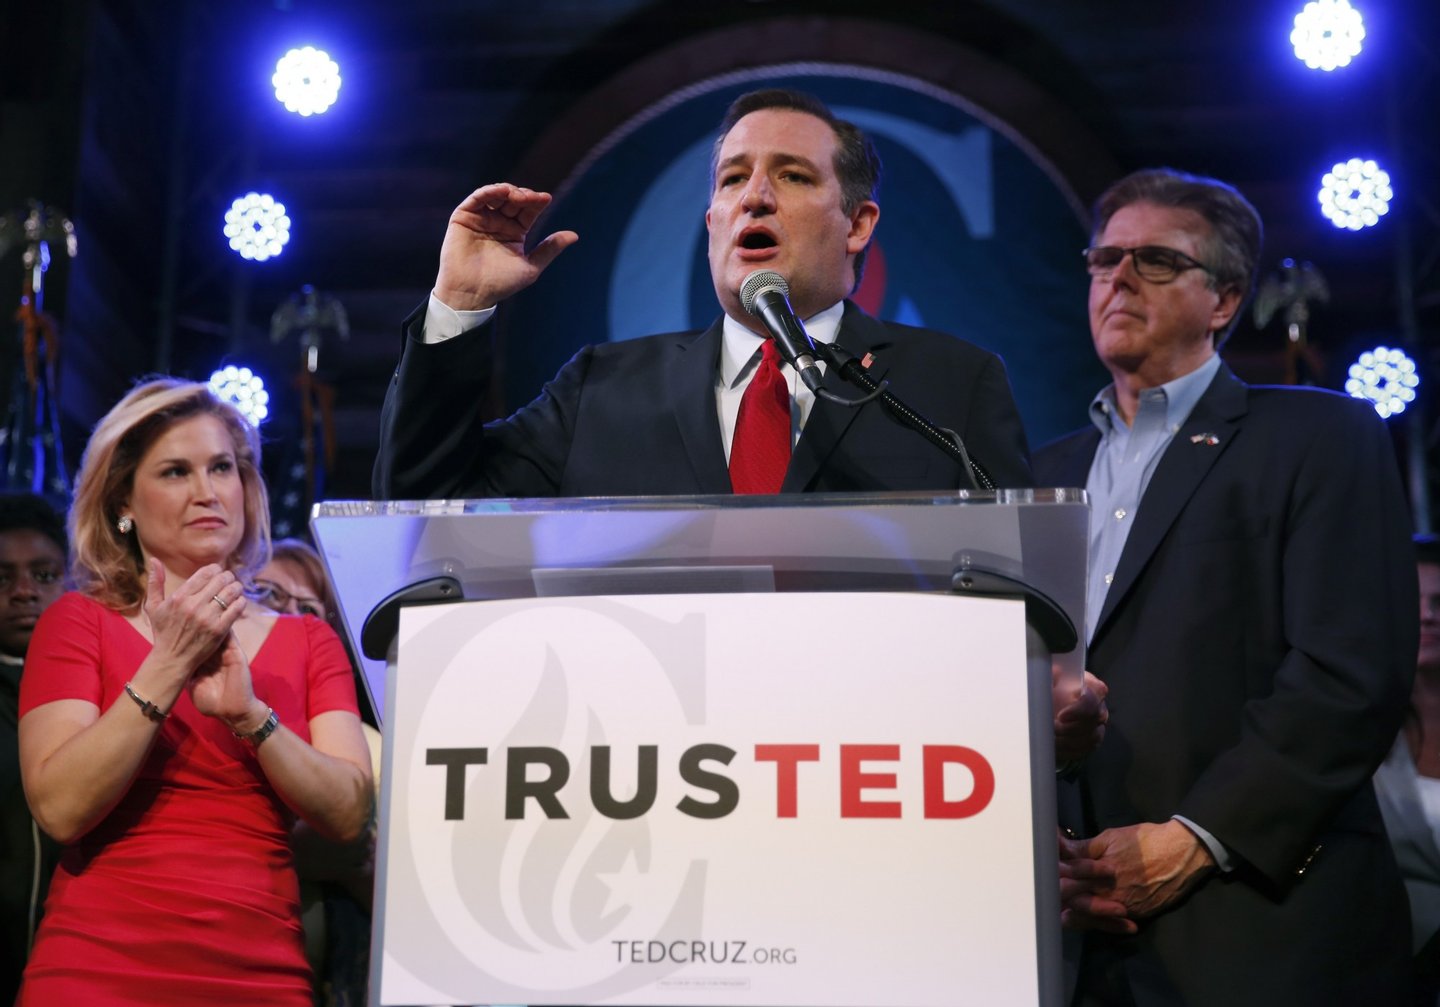 STAFFORD, TX - MARCH 1: Republican presidential candidate, Sen. Ted Cruz (R-TX), with wife Heidi and Texas Attorney General Dan Patrick by his side, celebrates at a Super Tuesday watch party at the Redneck Country Club March 1, 2016 in Stafford, Texas. Cruz won the Texas and Florida primaries. (Photo by Erich Schlegel/Getty Images)